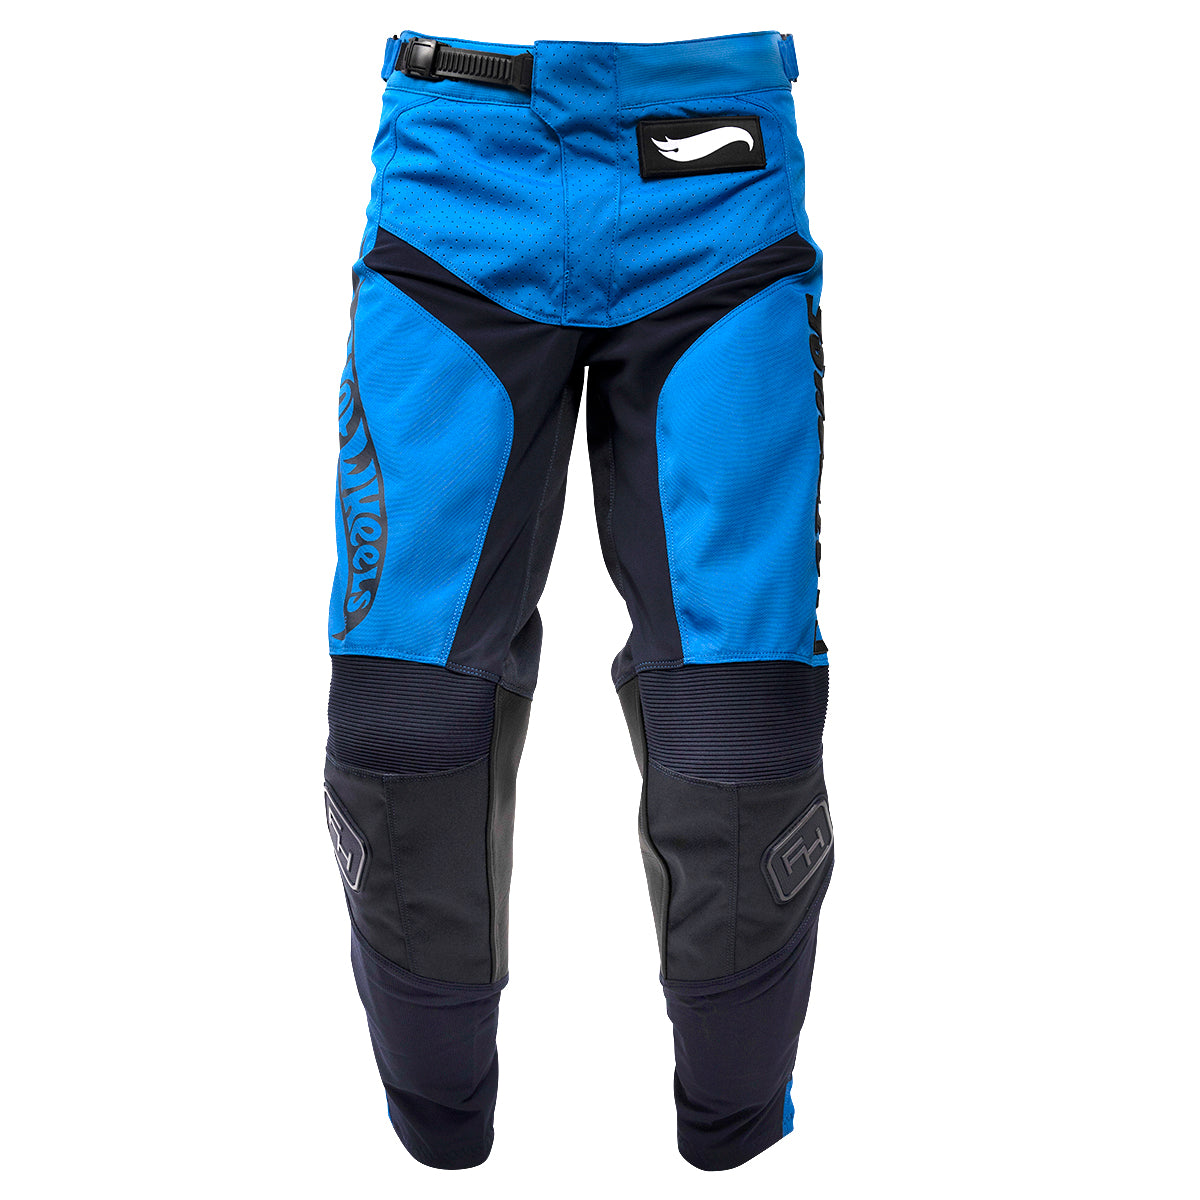 Hot Wheels Grindhouse Pant - Electric Blue